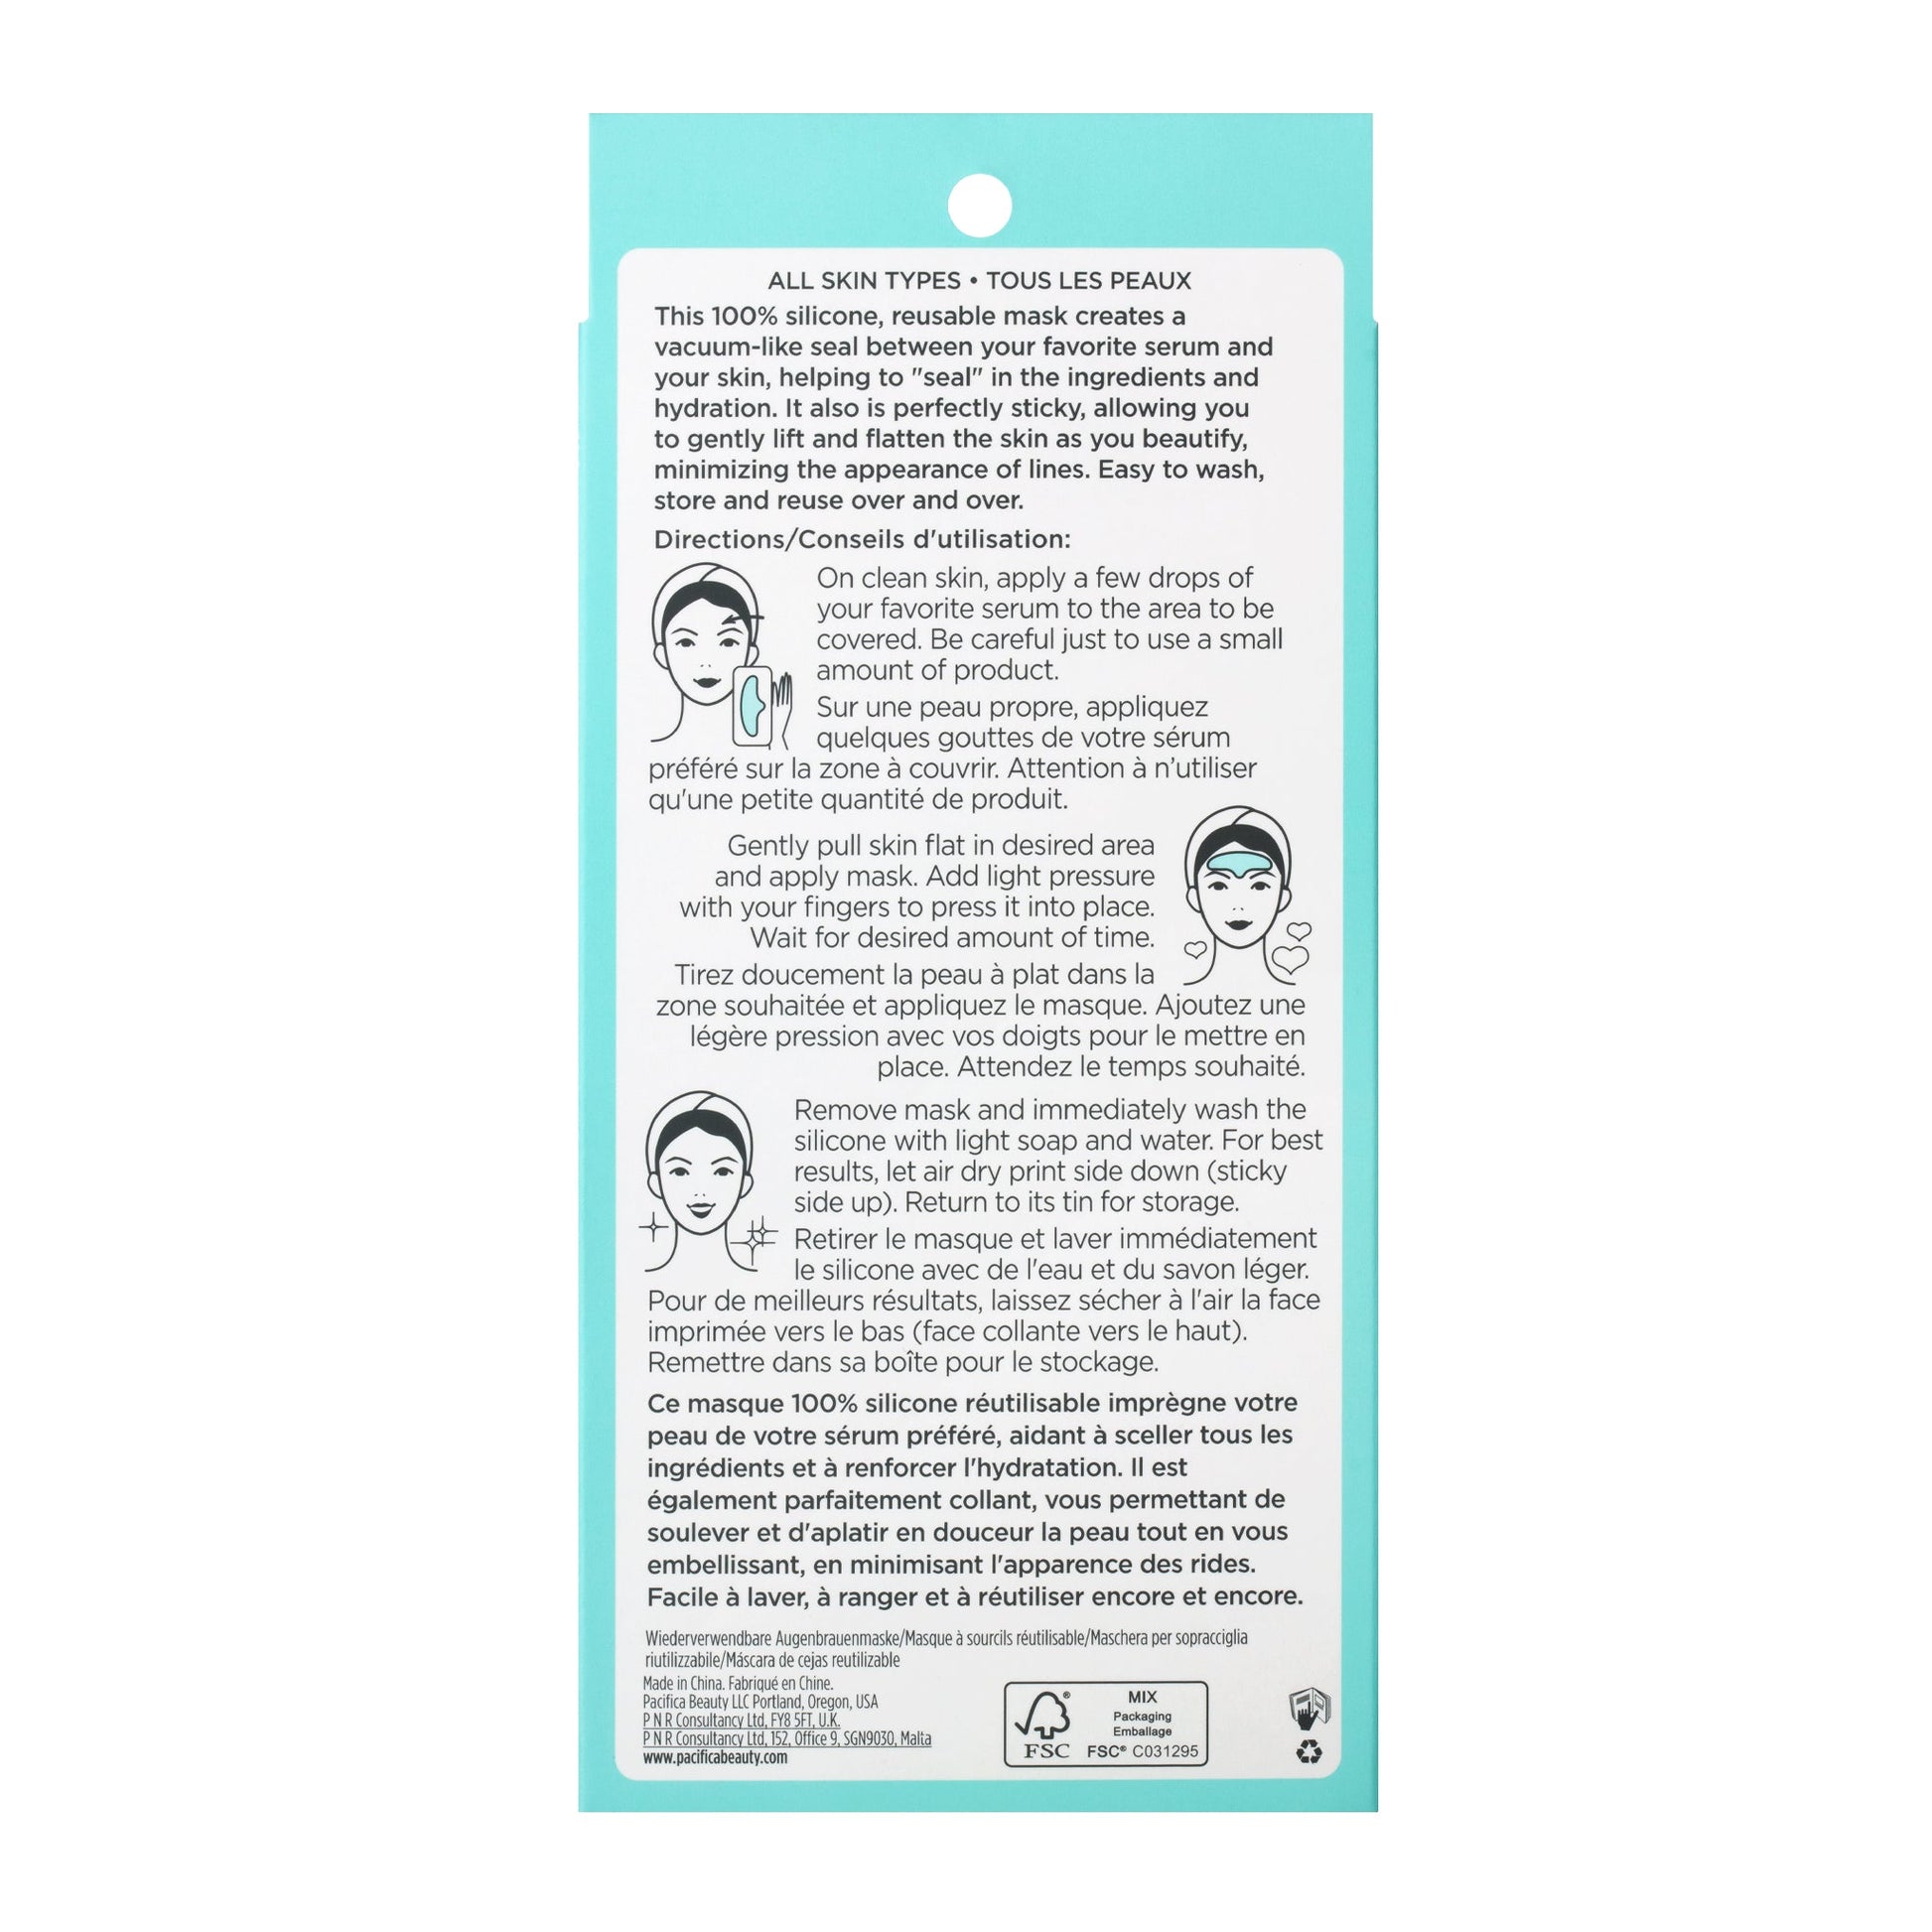 Reusable Mask Brow - Skin Care - Pacifica Beauty